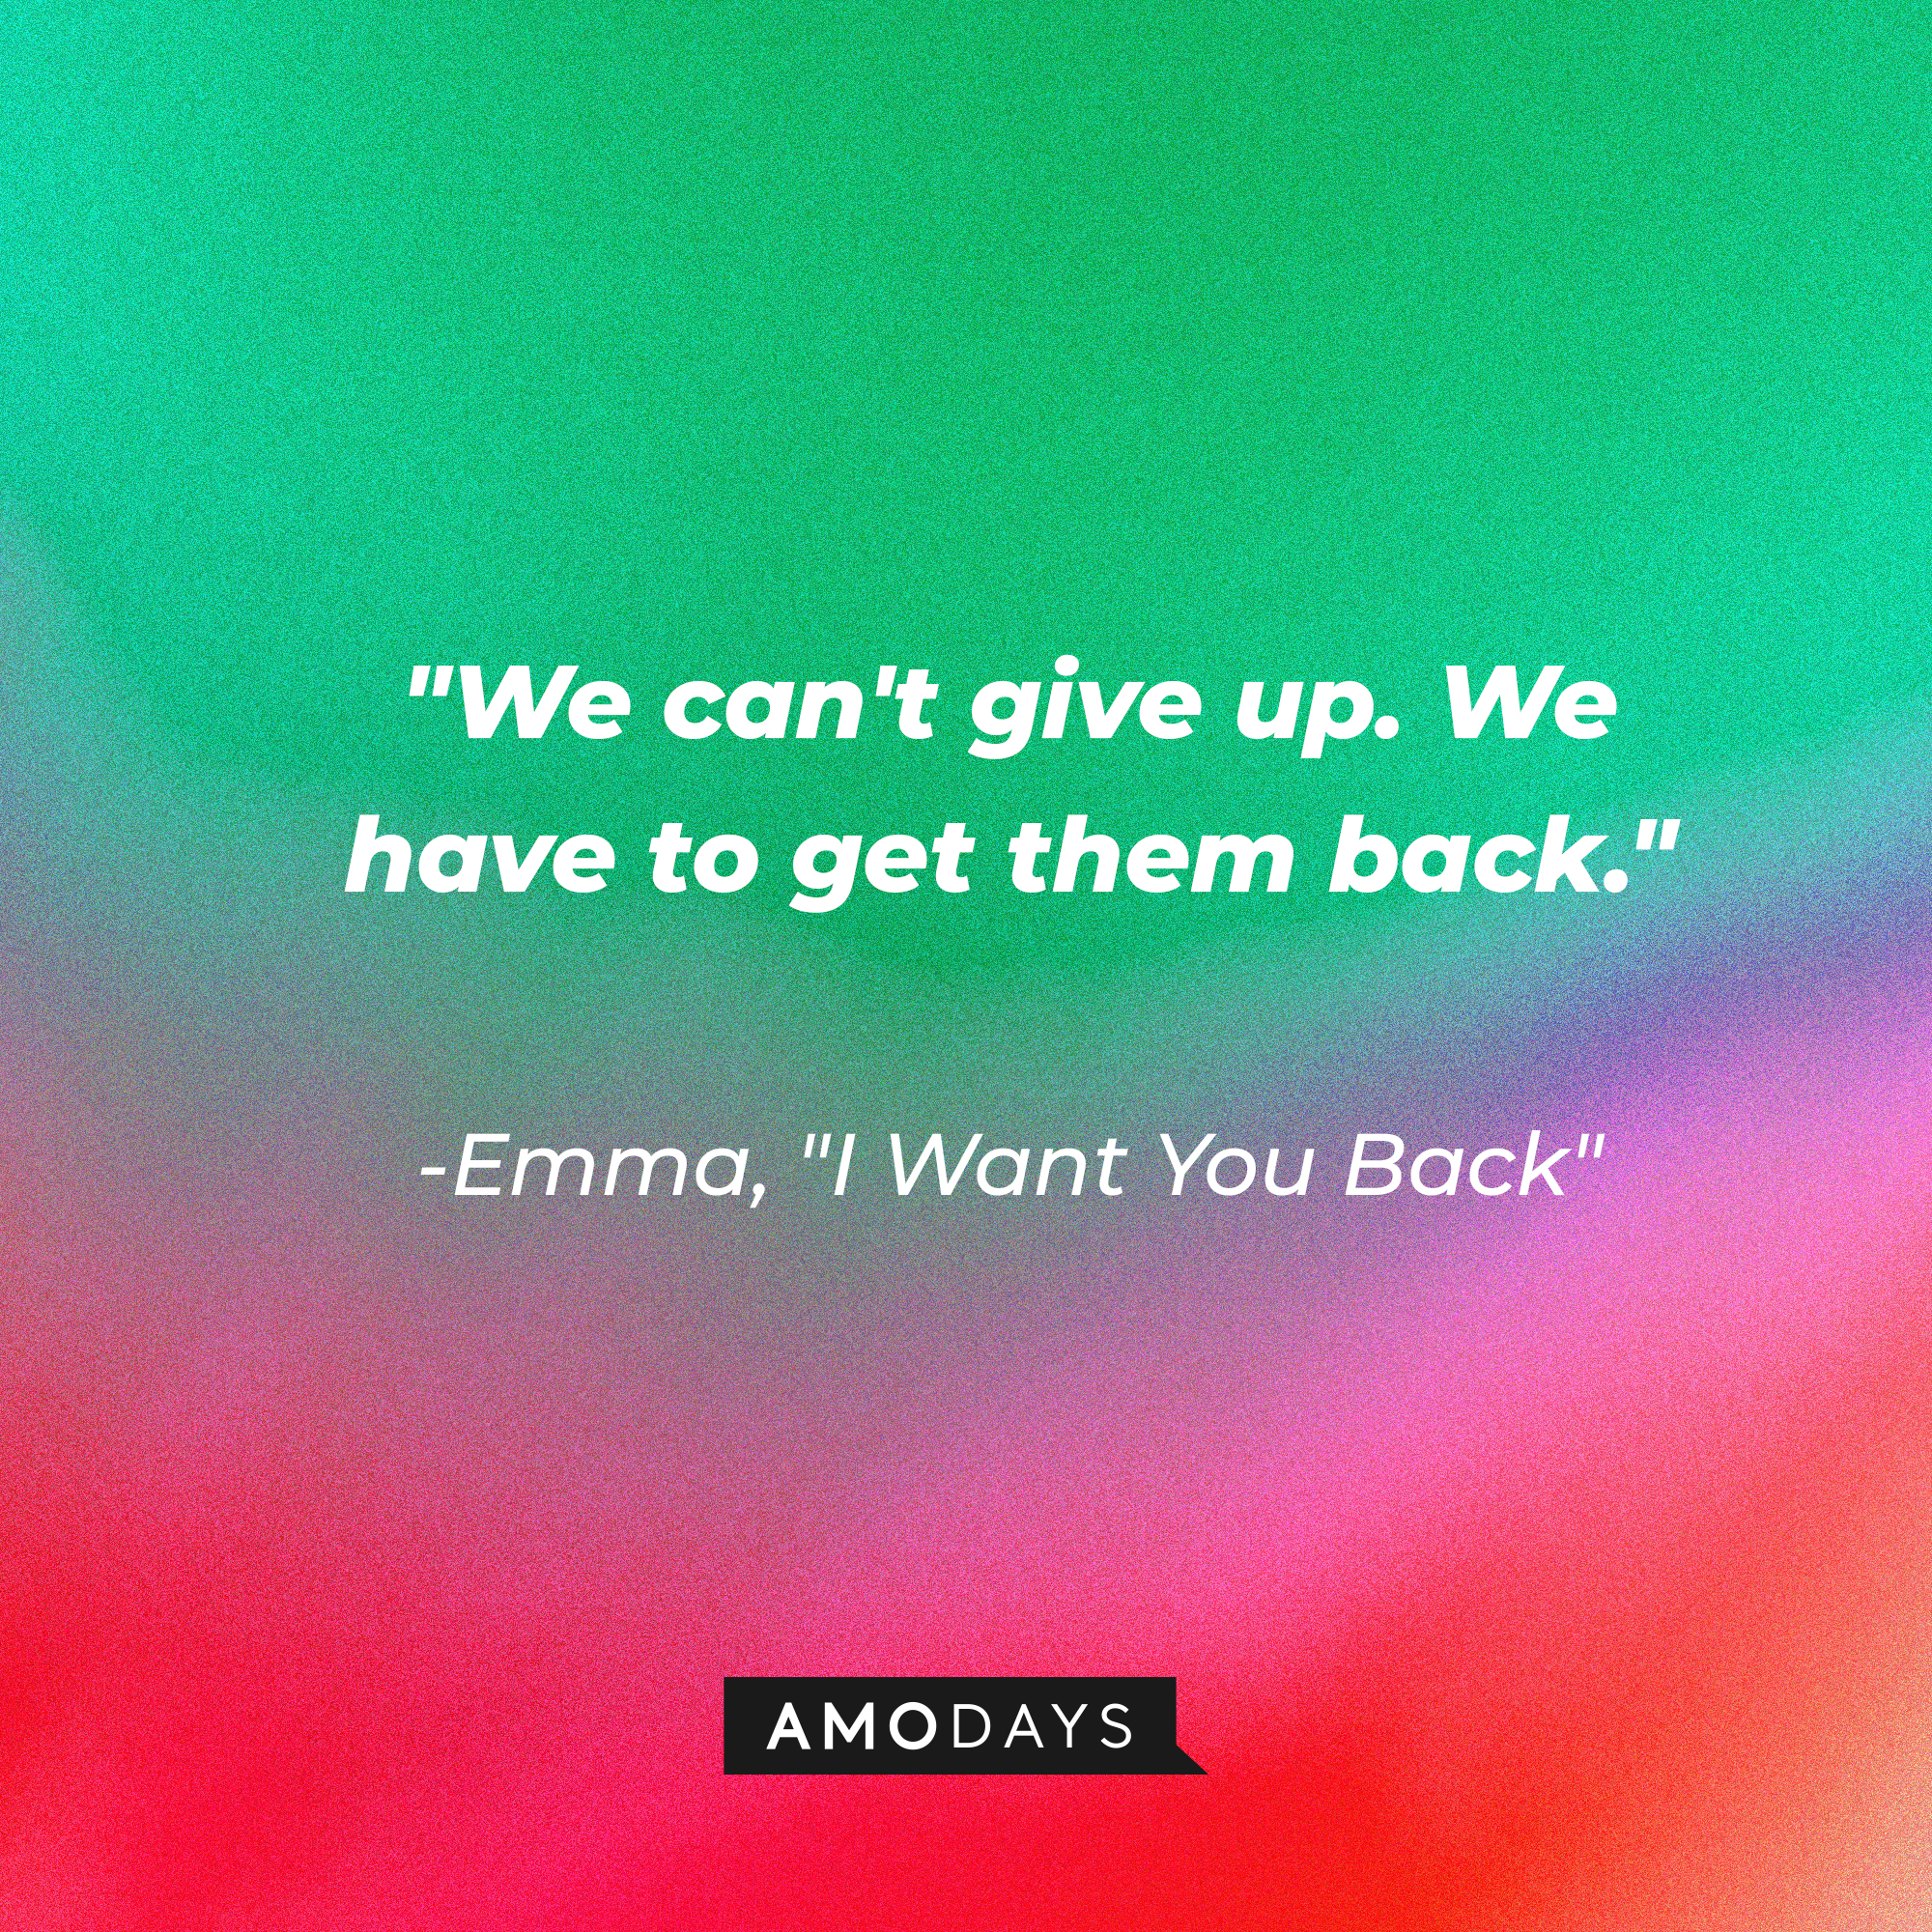 Emma's quote in "I Want You Back:" "We can't give up. We have to get them back." | Source: AmoDays